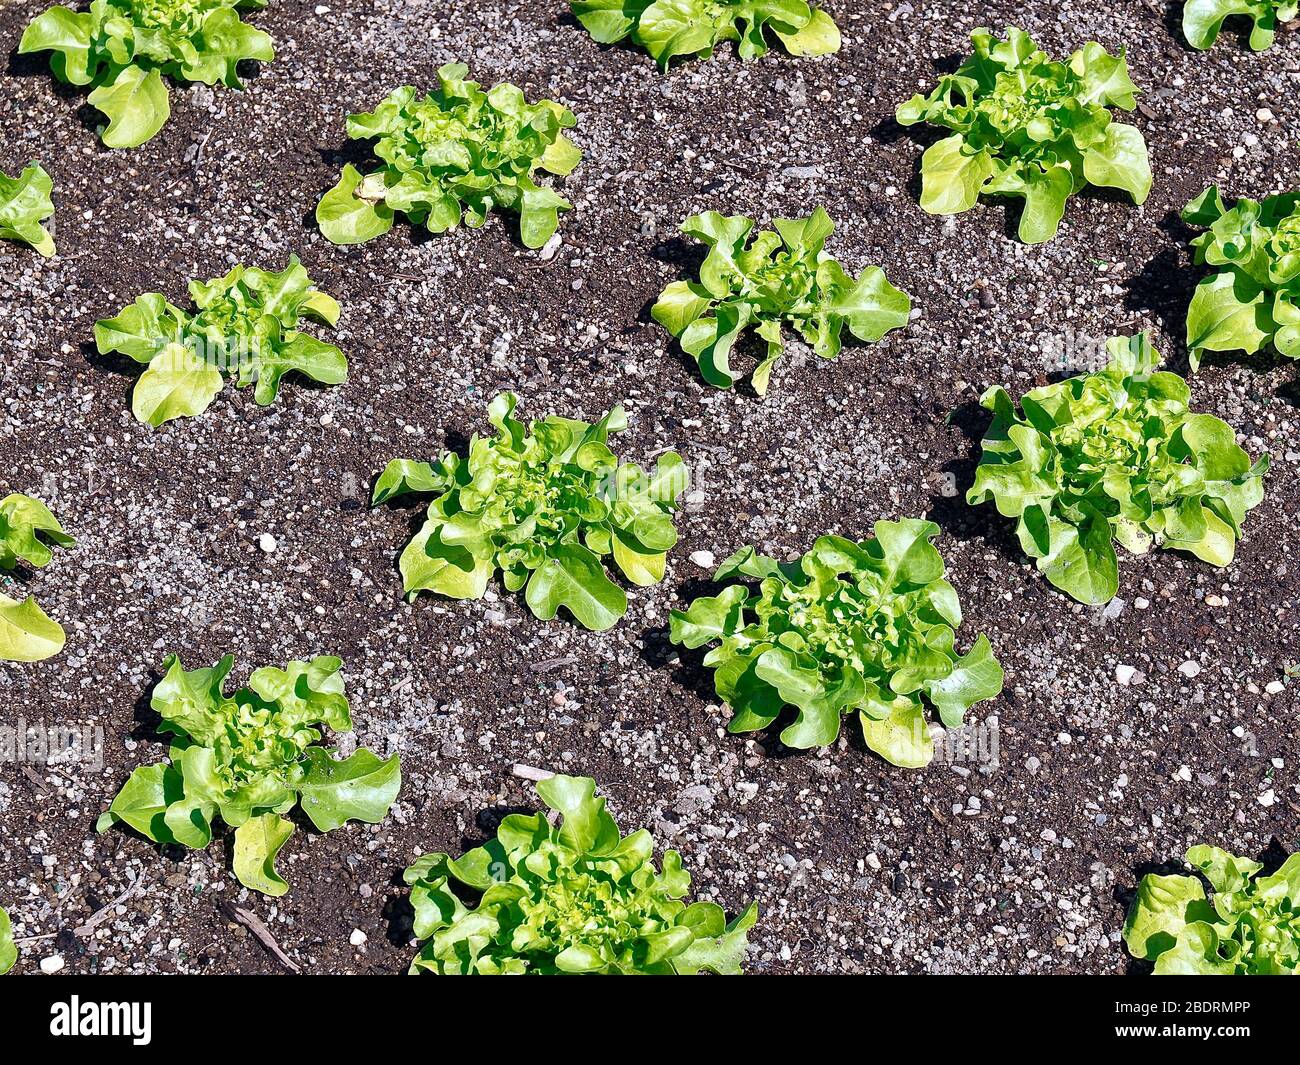 Young green salad plants growing in a field Stock Photo